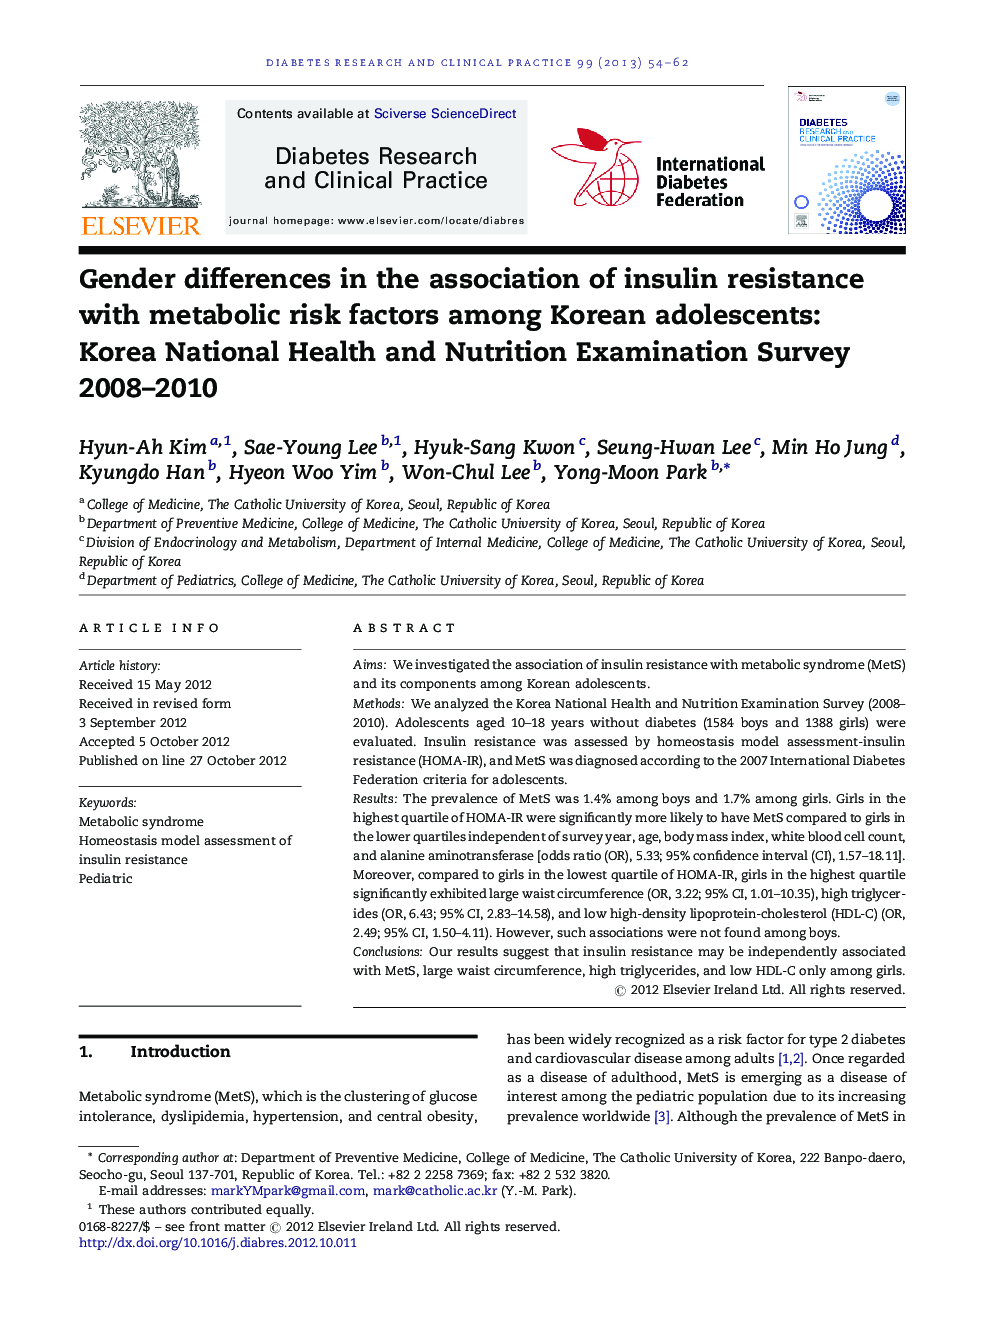 Gender differences in the association of insulin resistance with metabolic risk factors among Korean adolescents: Korea National Health and Nutrition Examination Survey 2008–2010